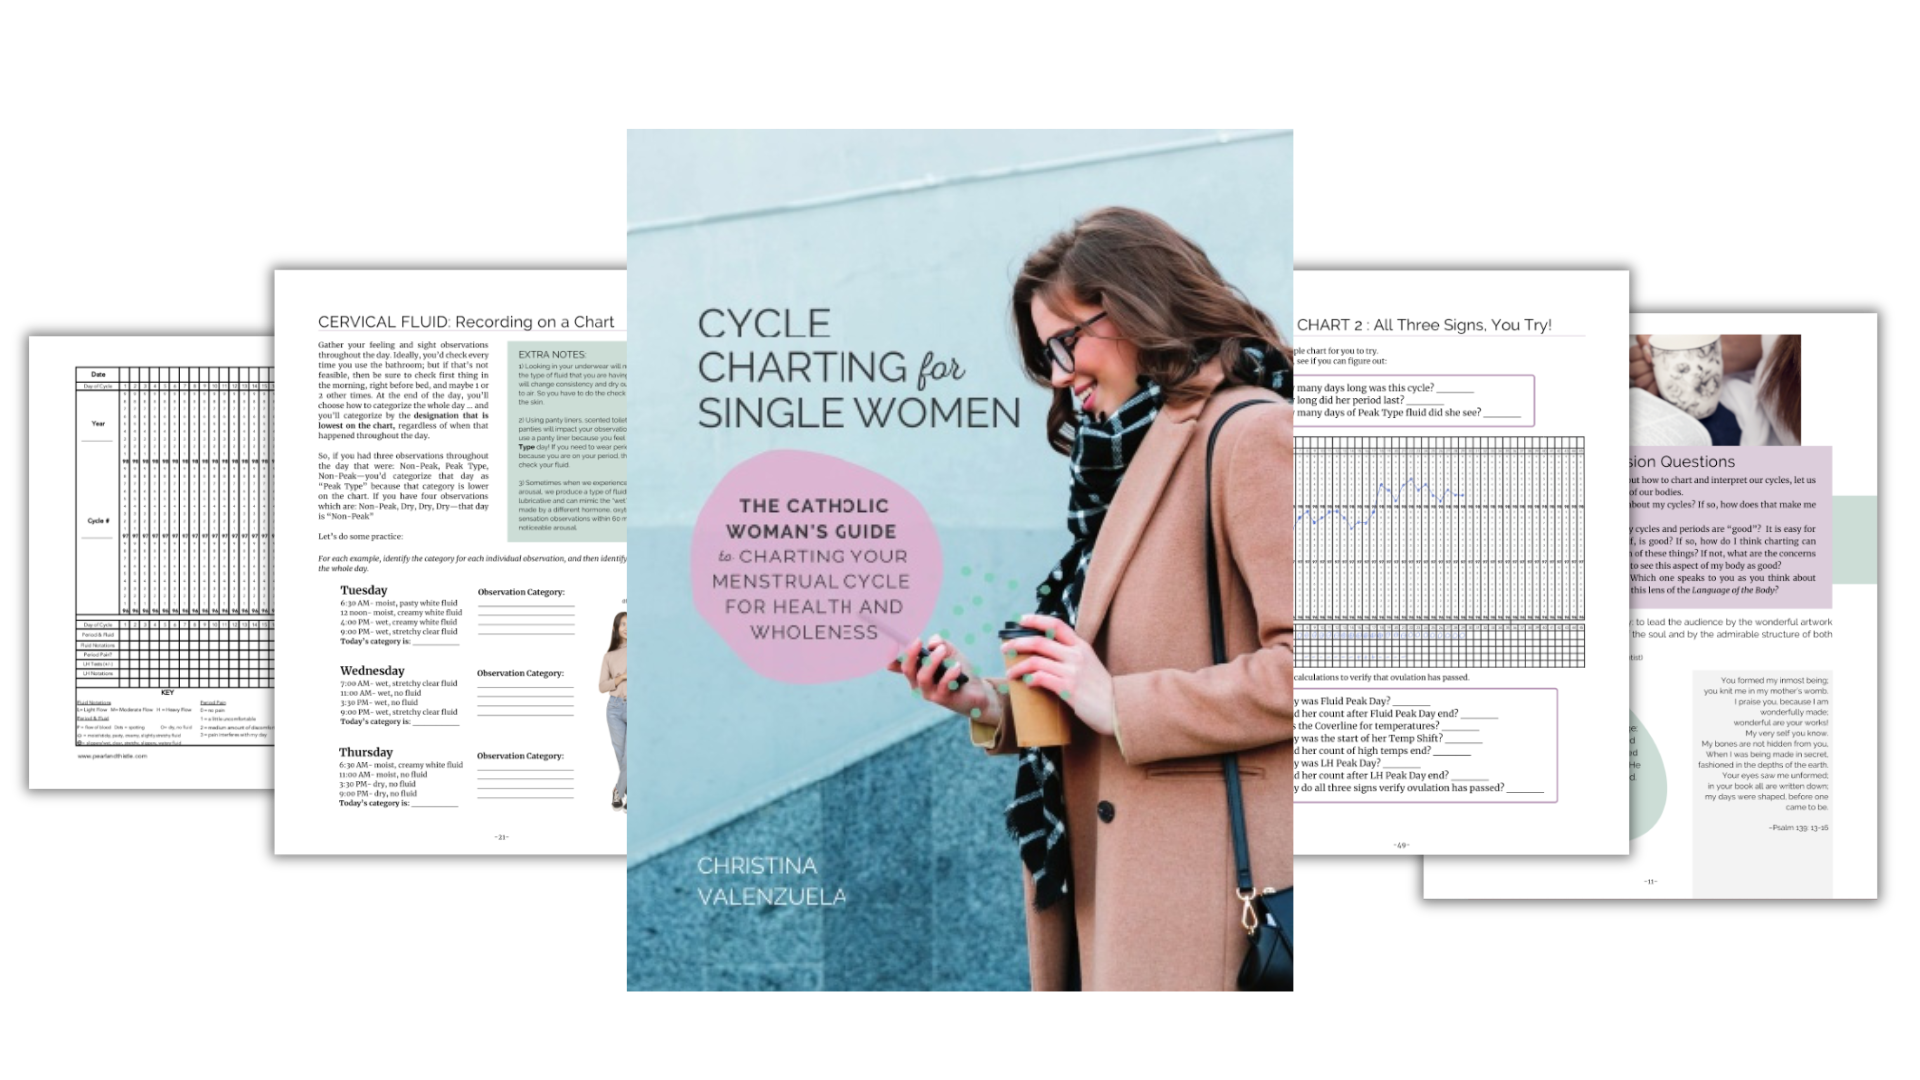 Sample pages from Cycle Charting for Single Women, with cover featuring woman wearing a scarf and coat holding coffee and looking at her phone